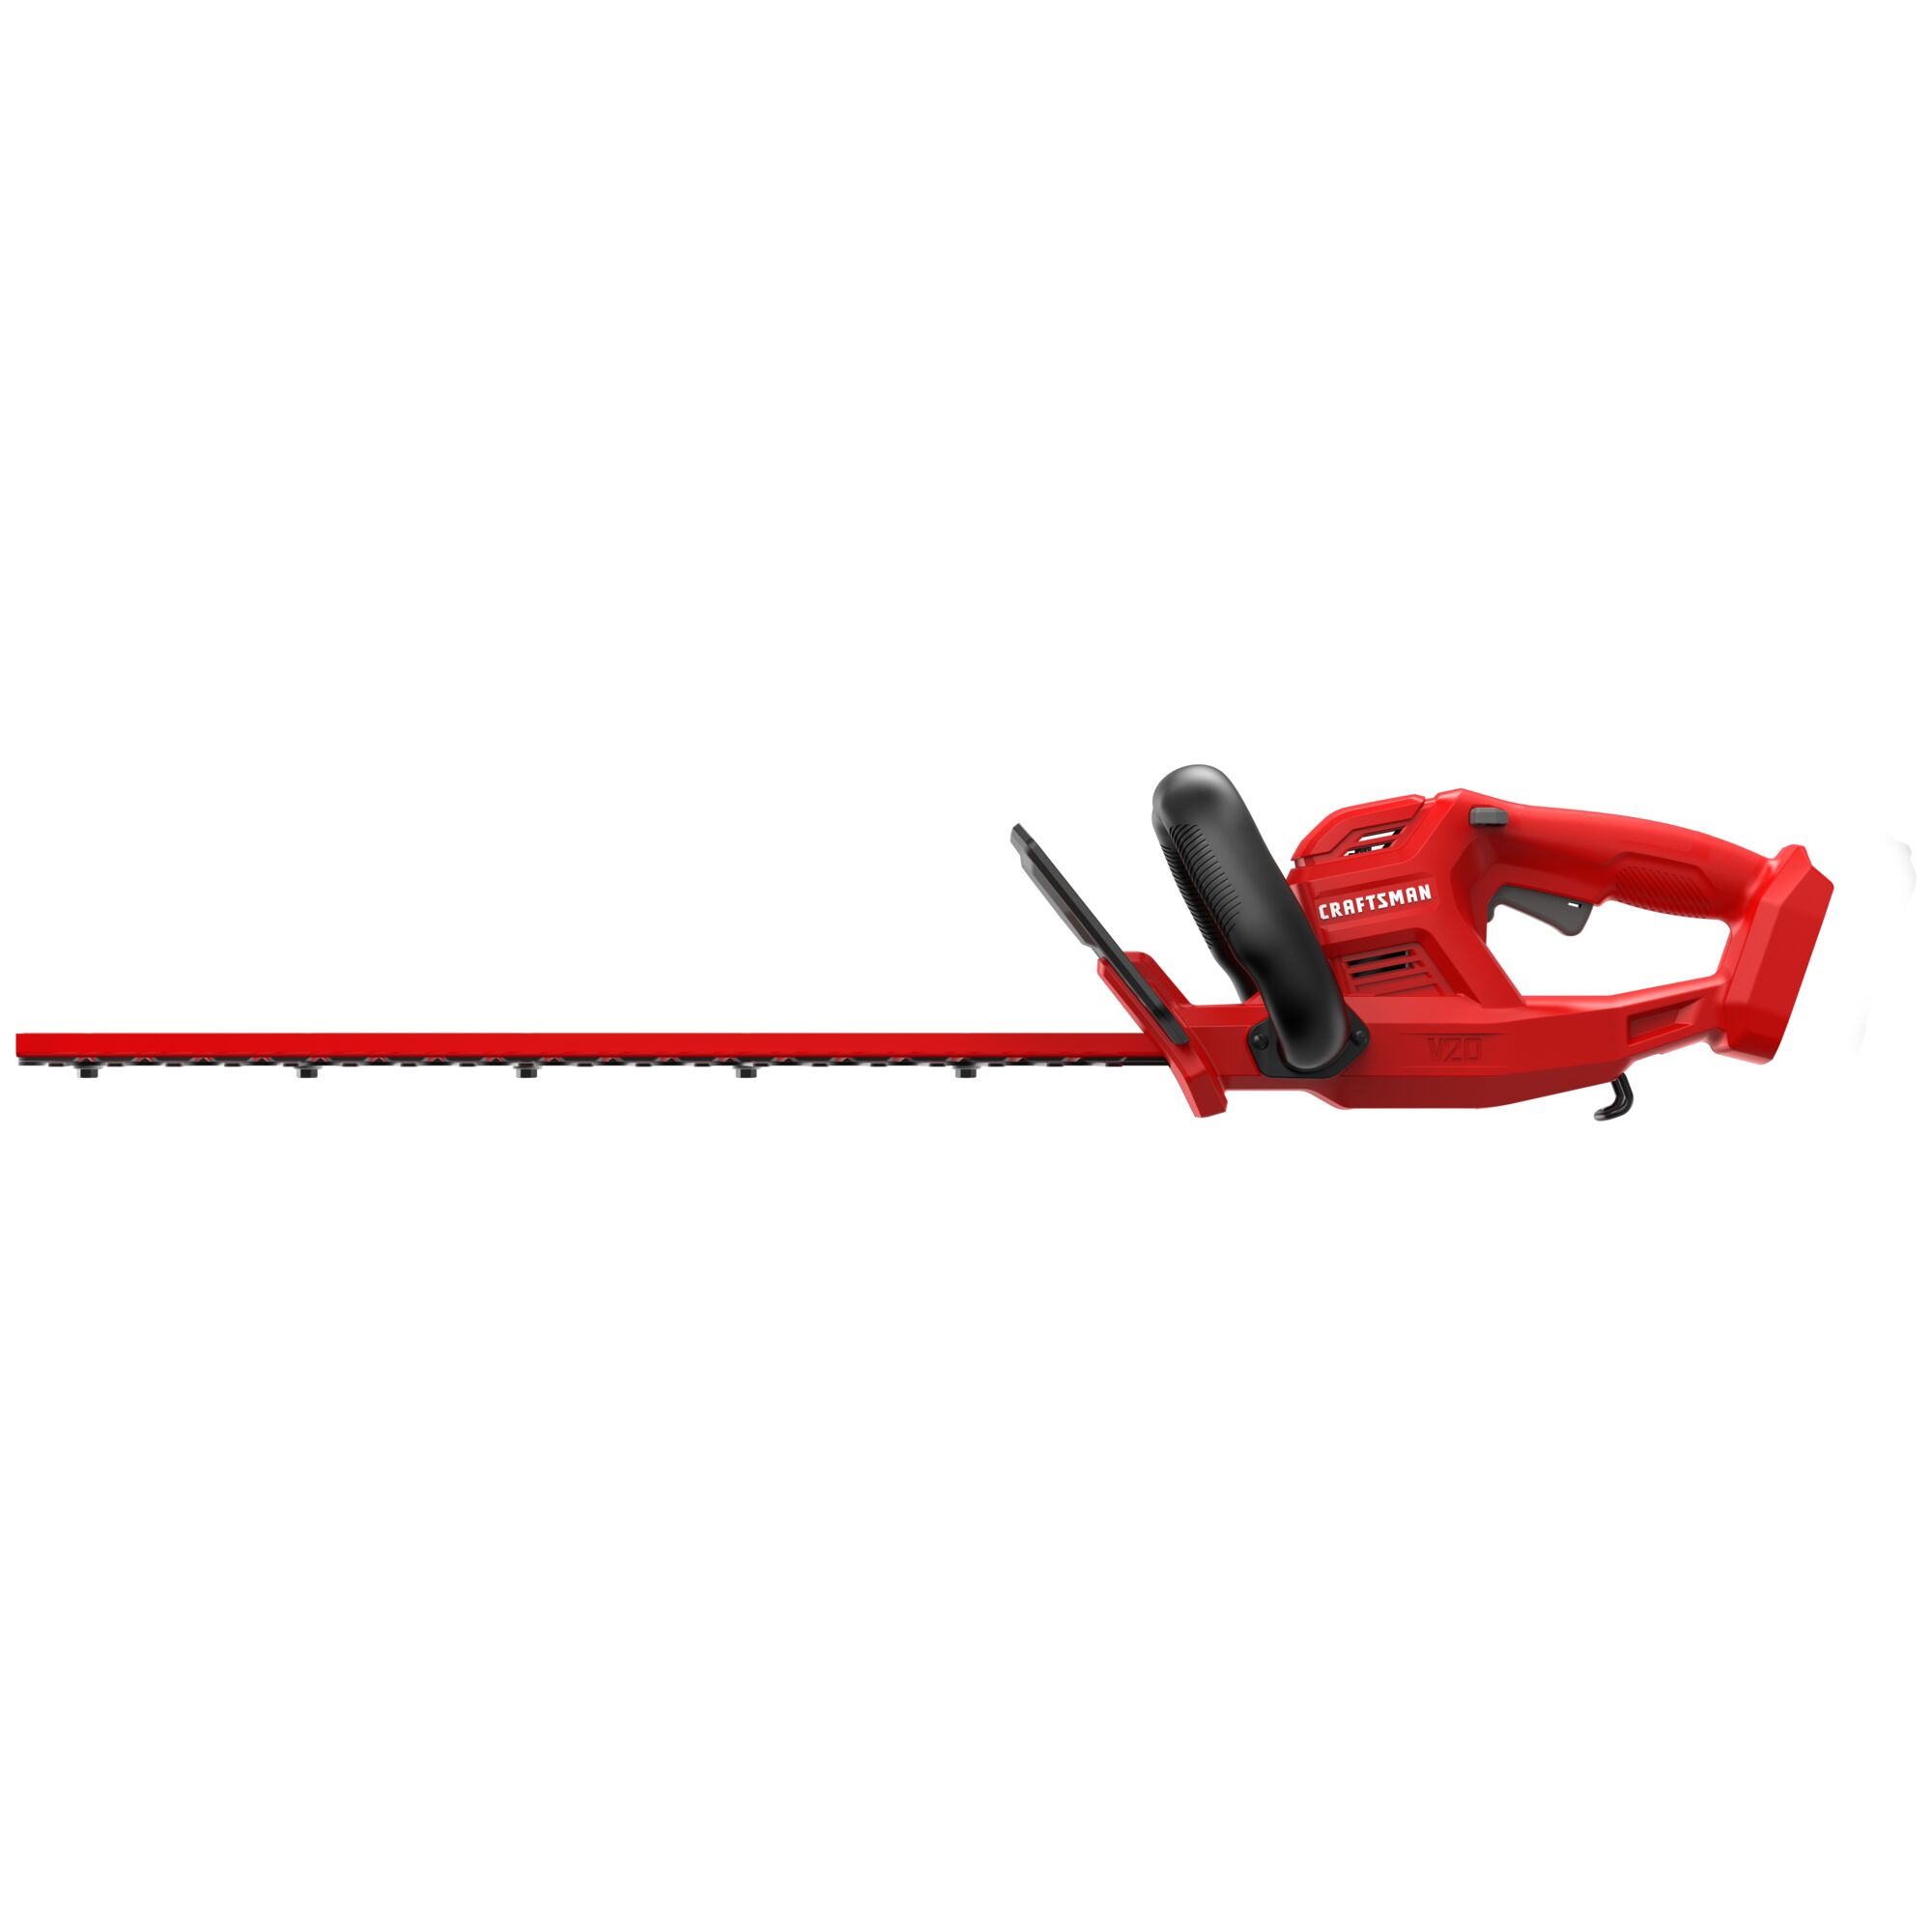 Right profile  view of cordless 20 inch hedge trimmer kit.